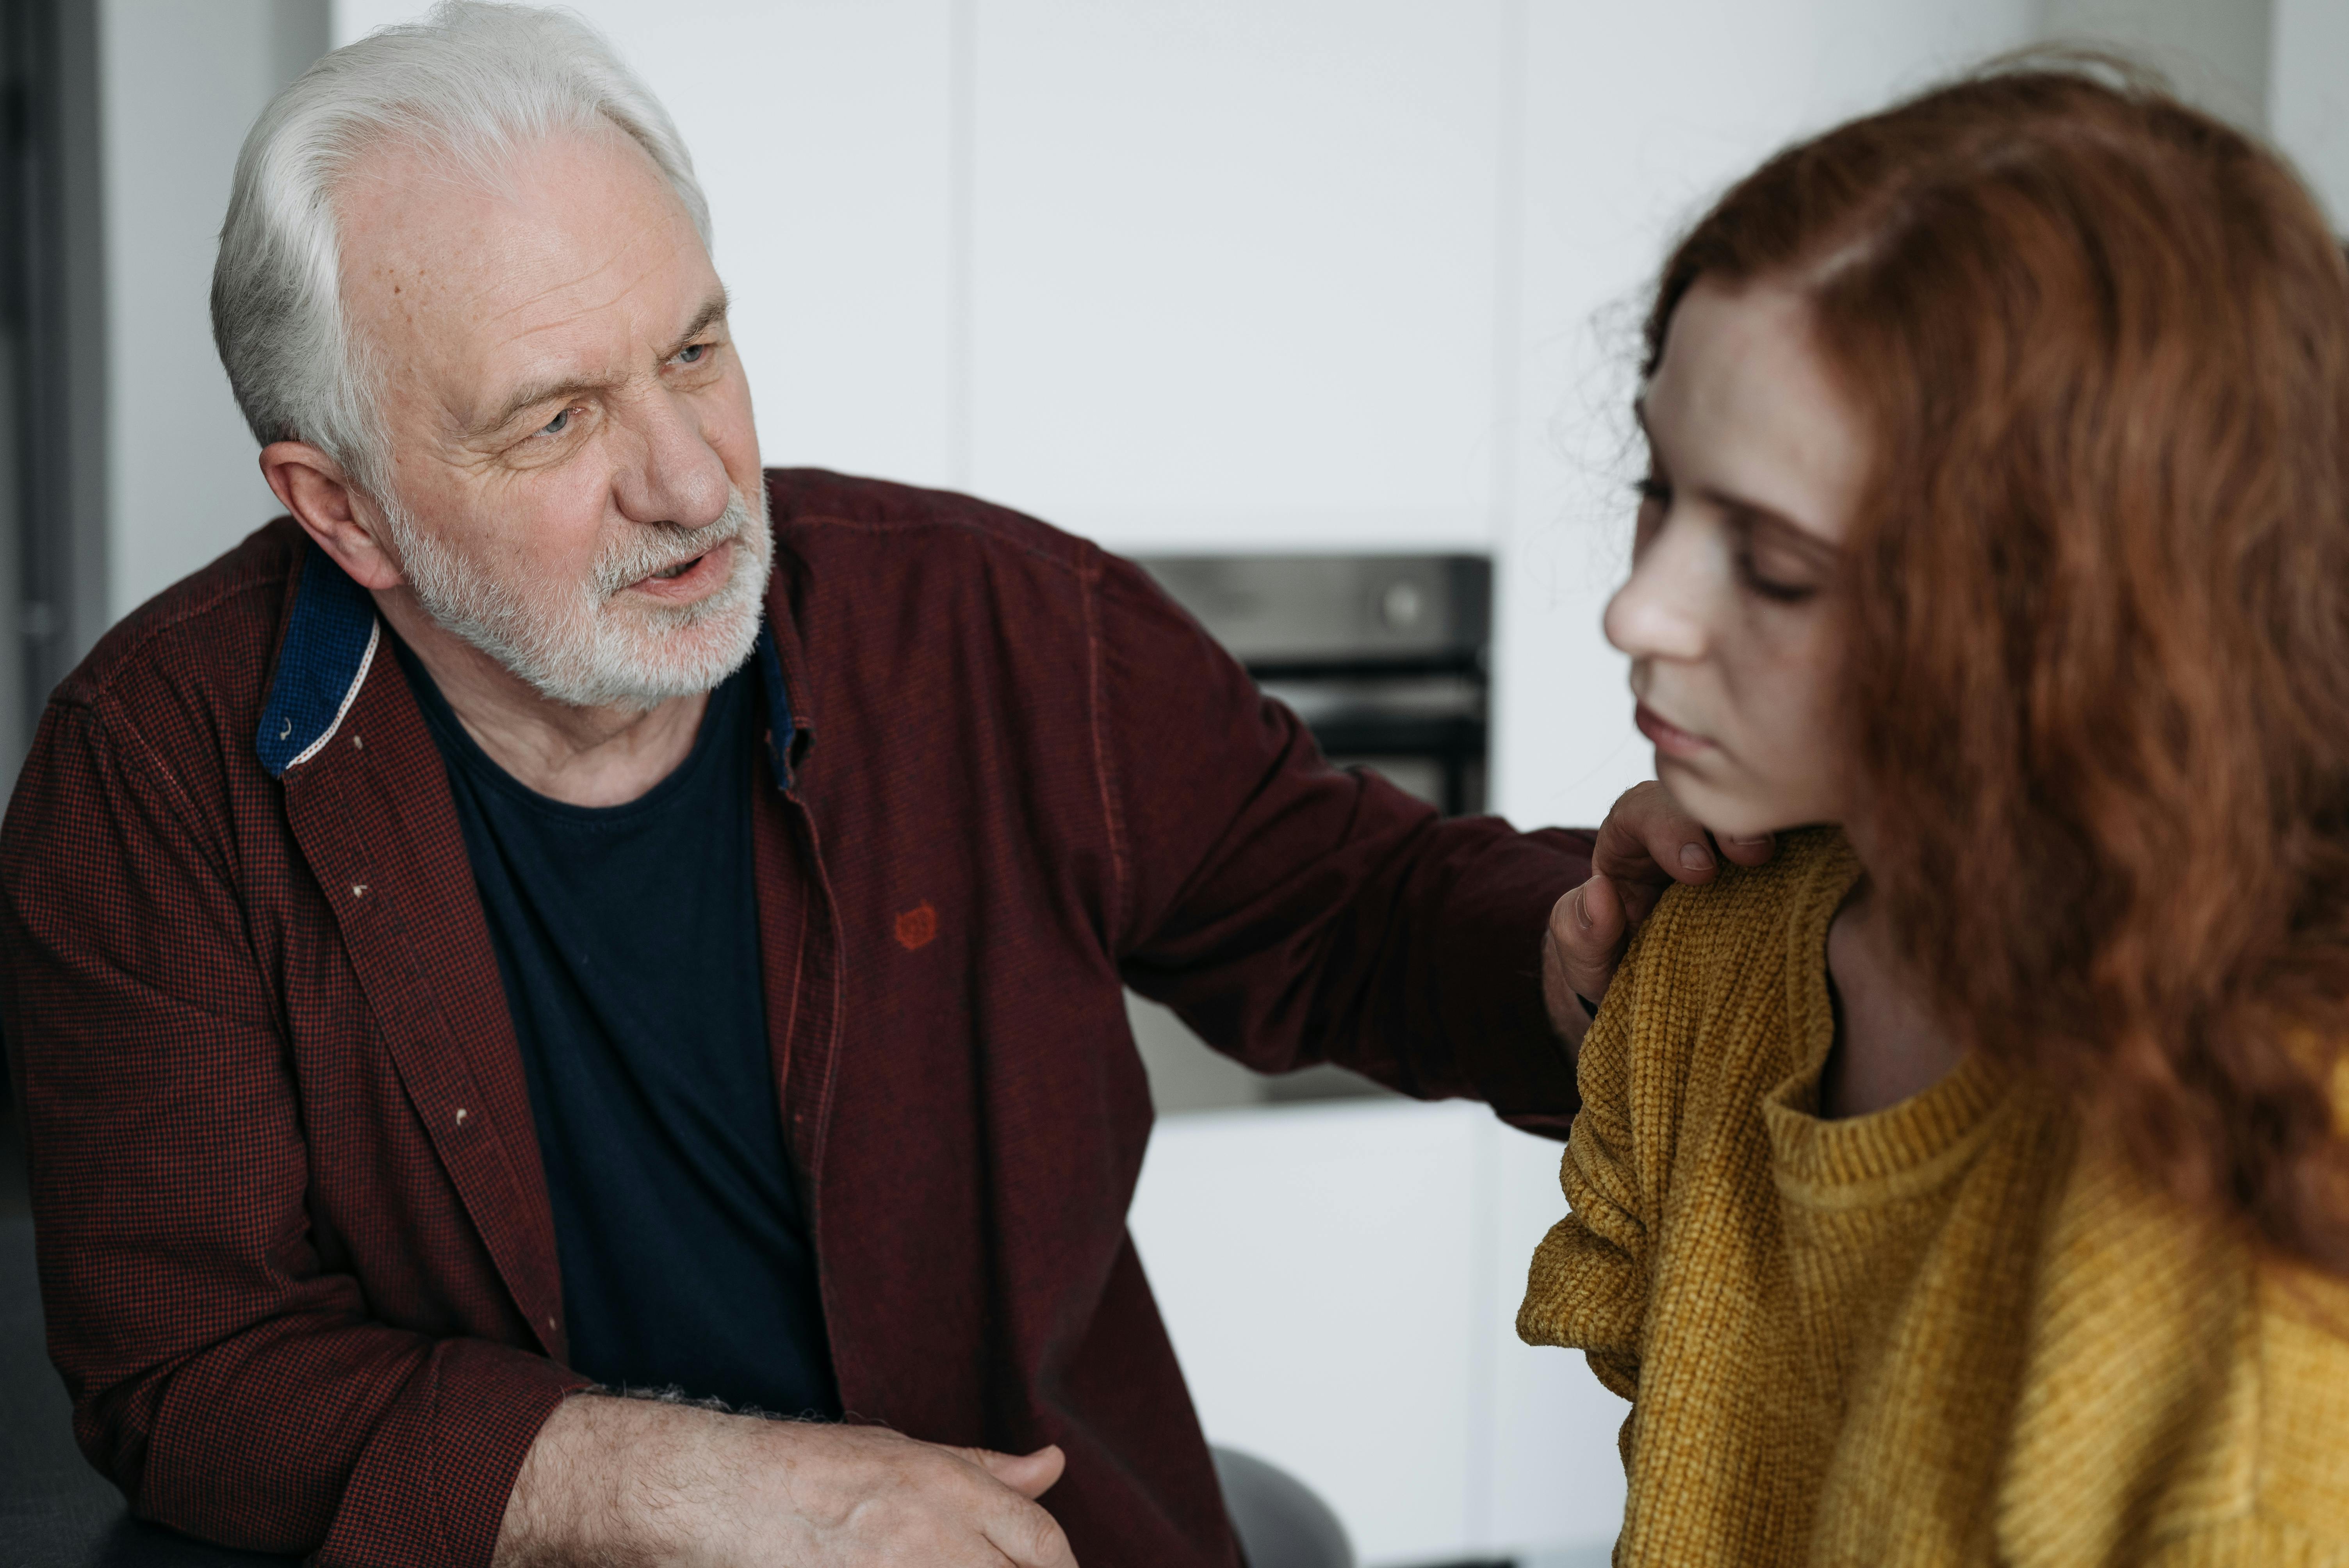 An older man talking to a younger woman | Source: Pexels